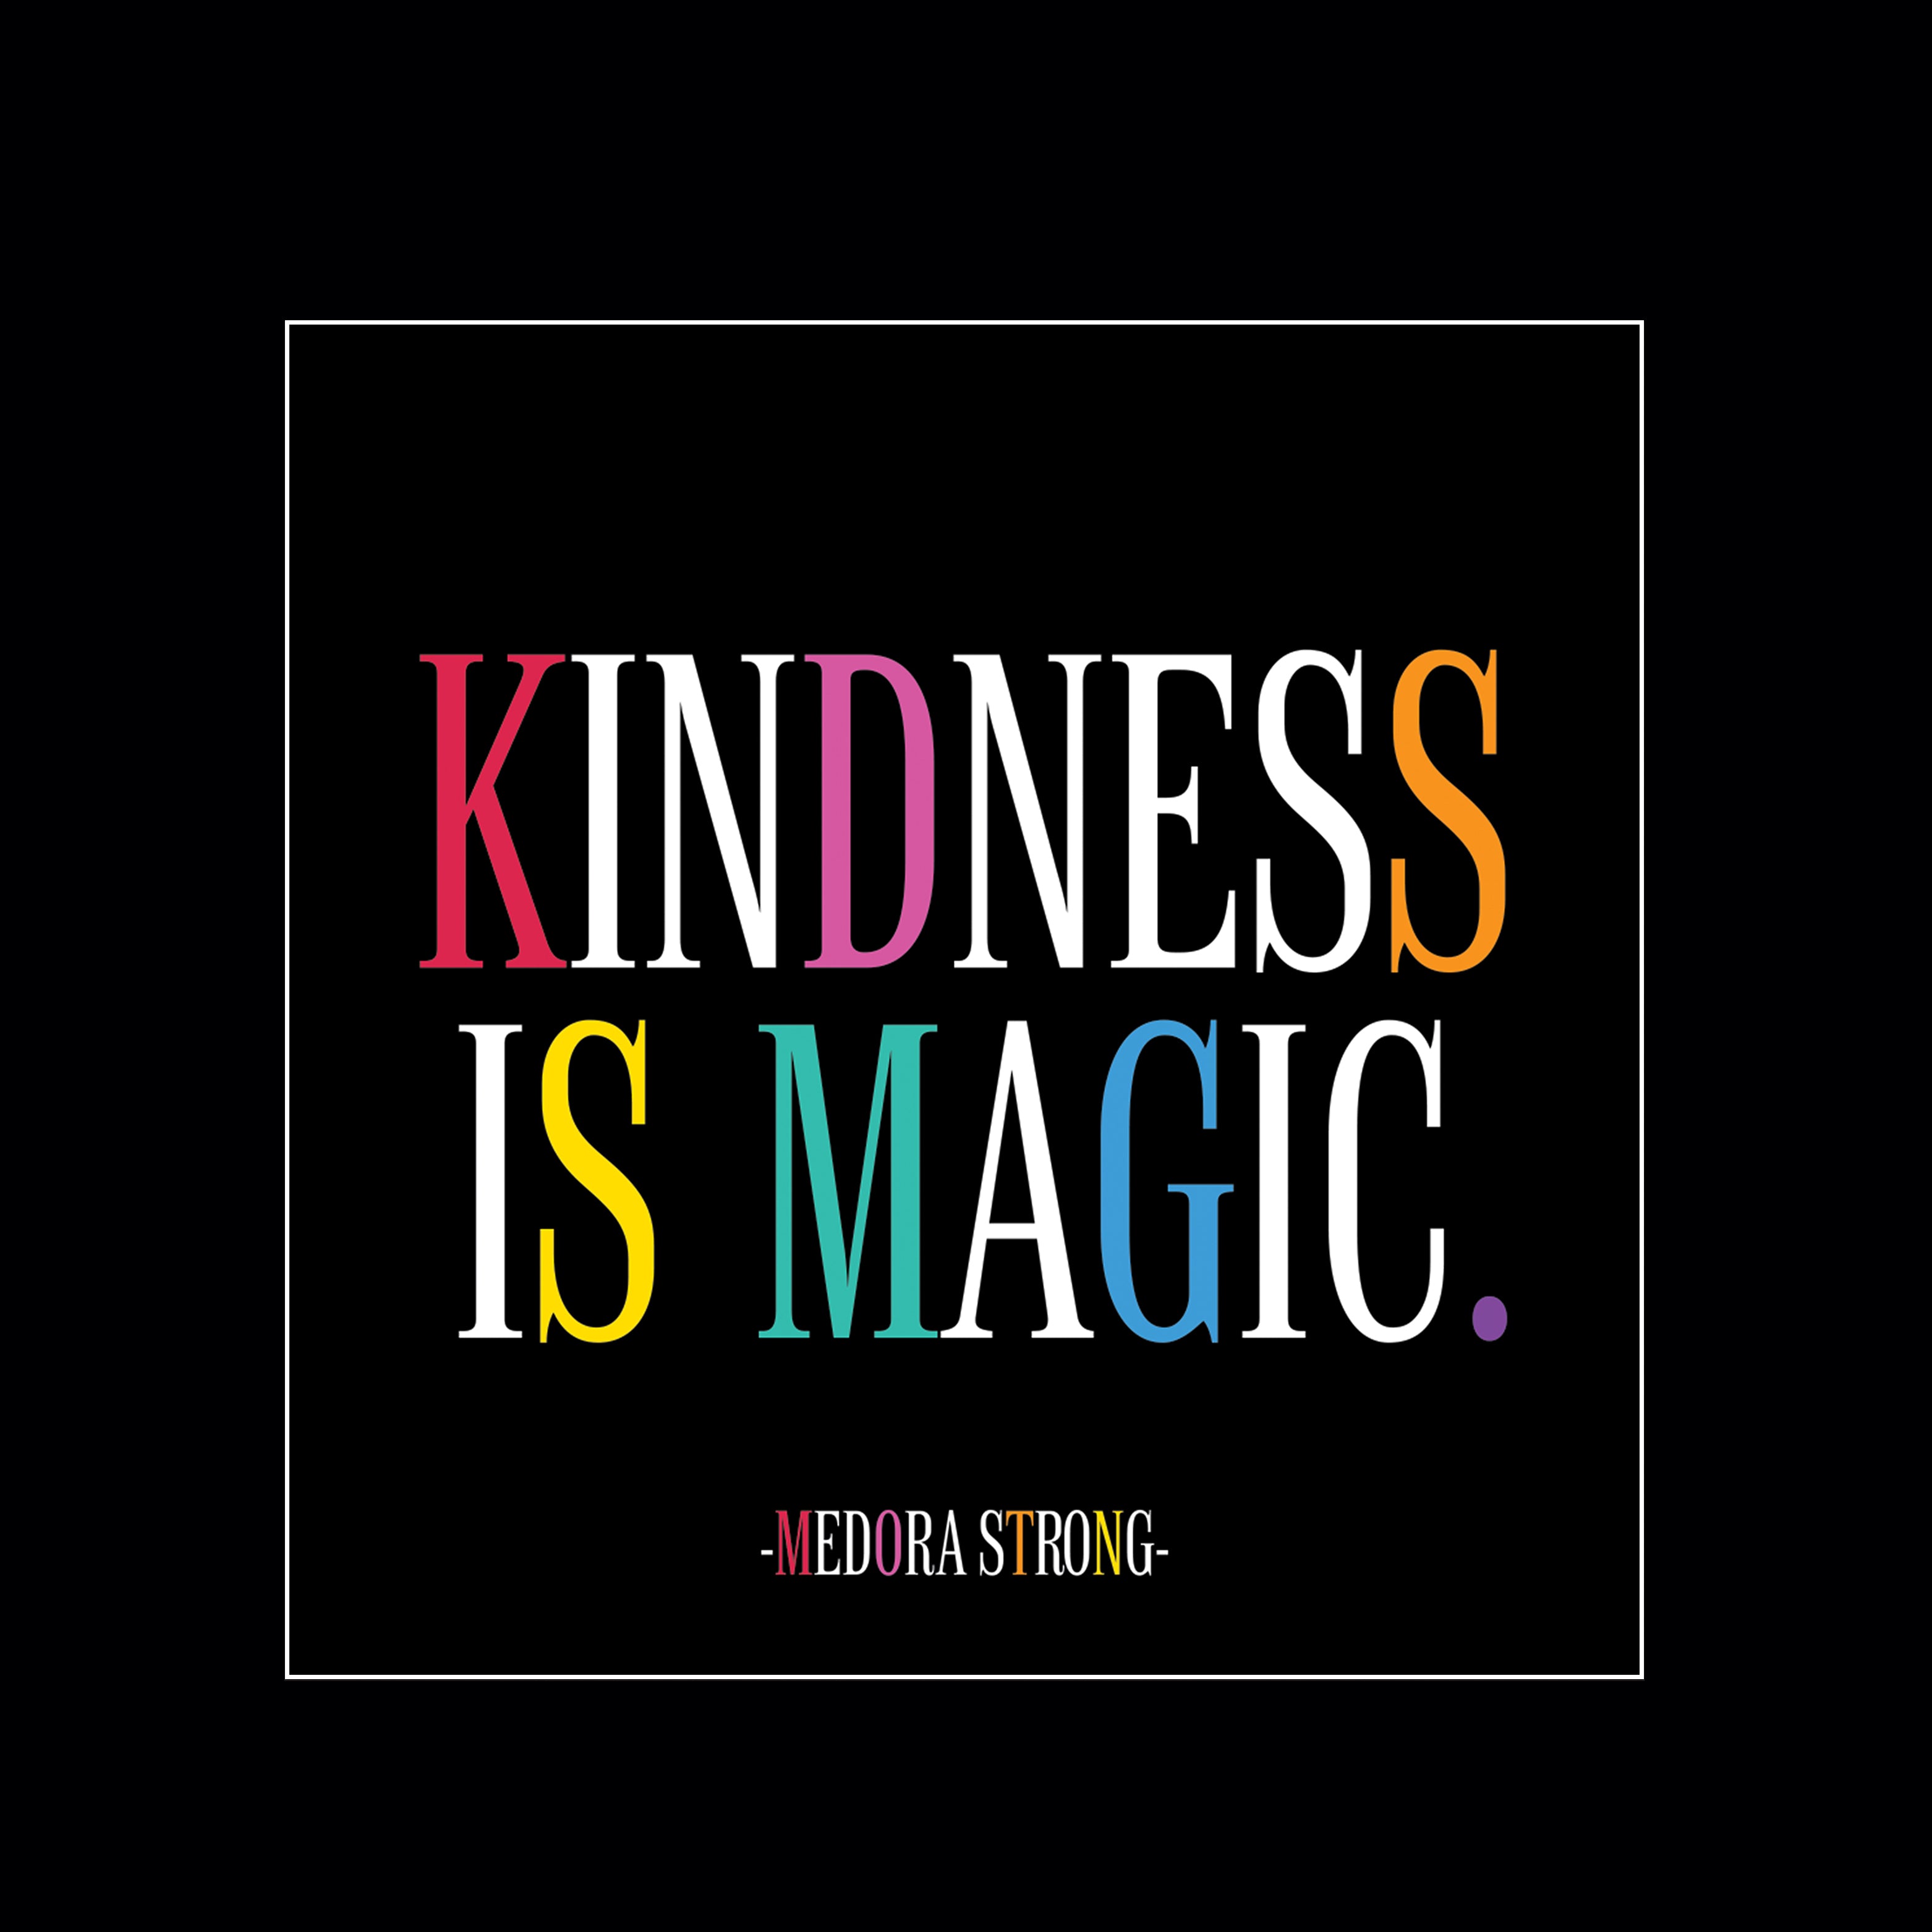 kindness is magnet – quotable